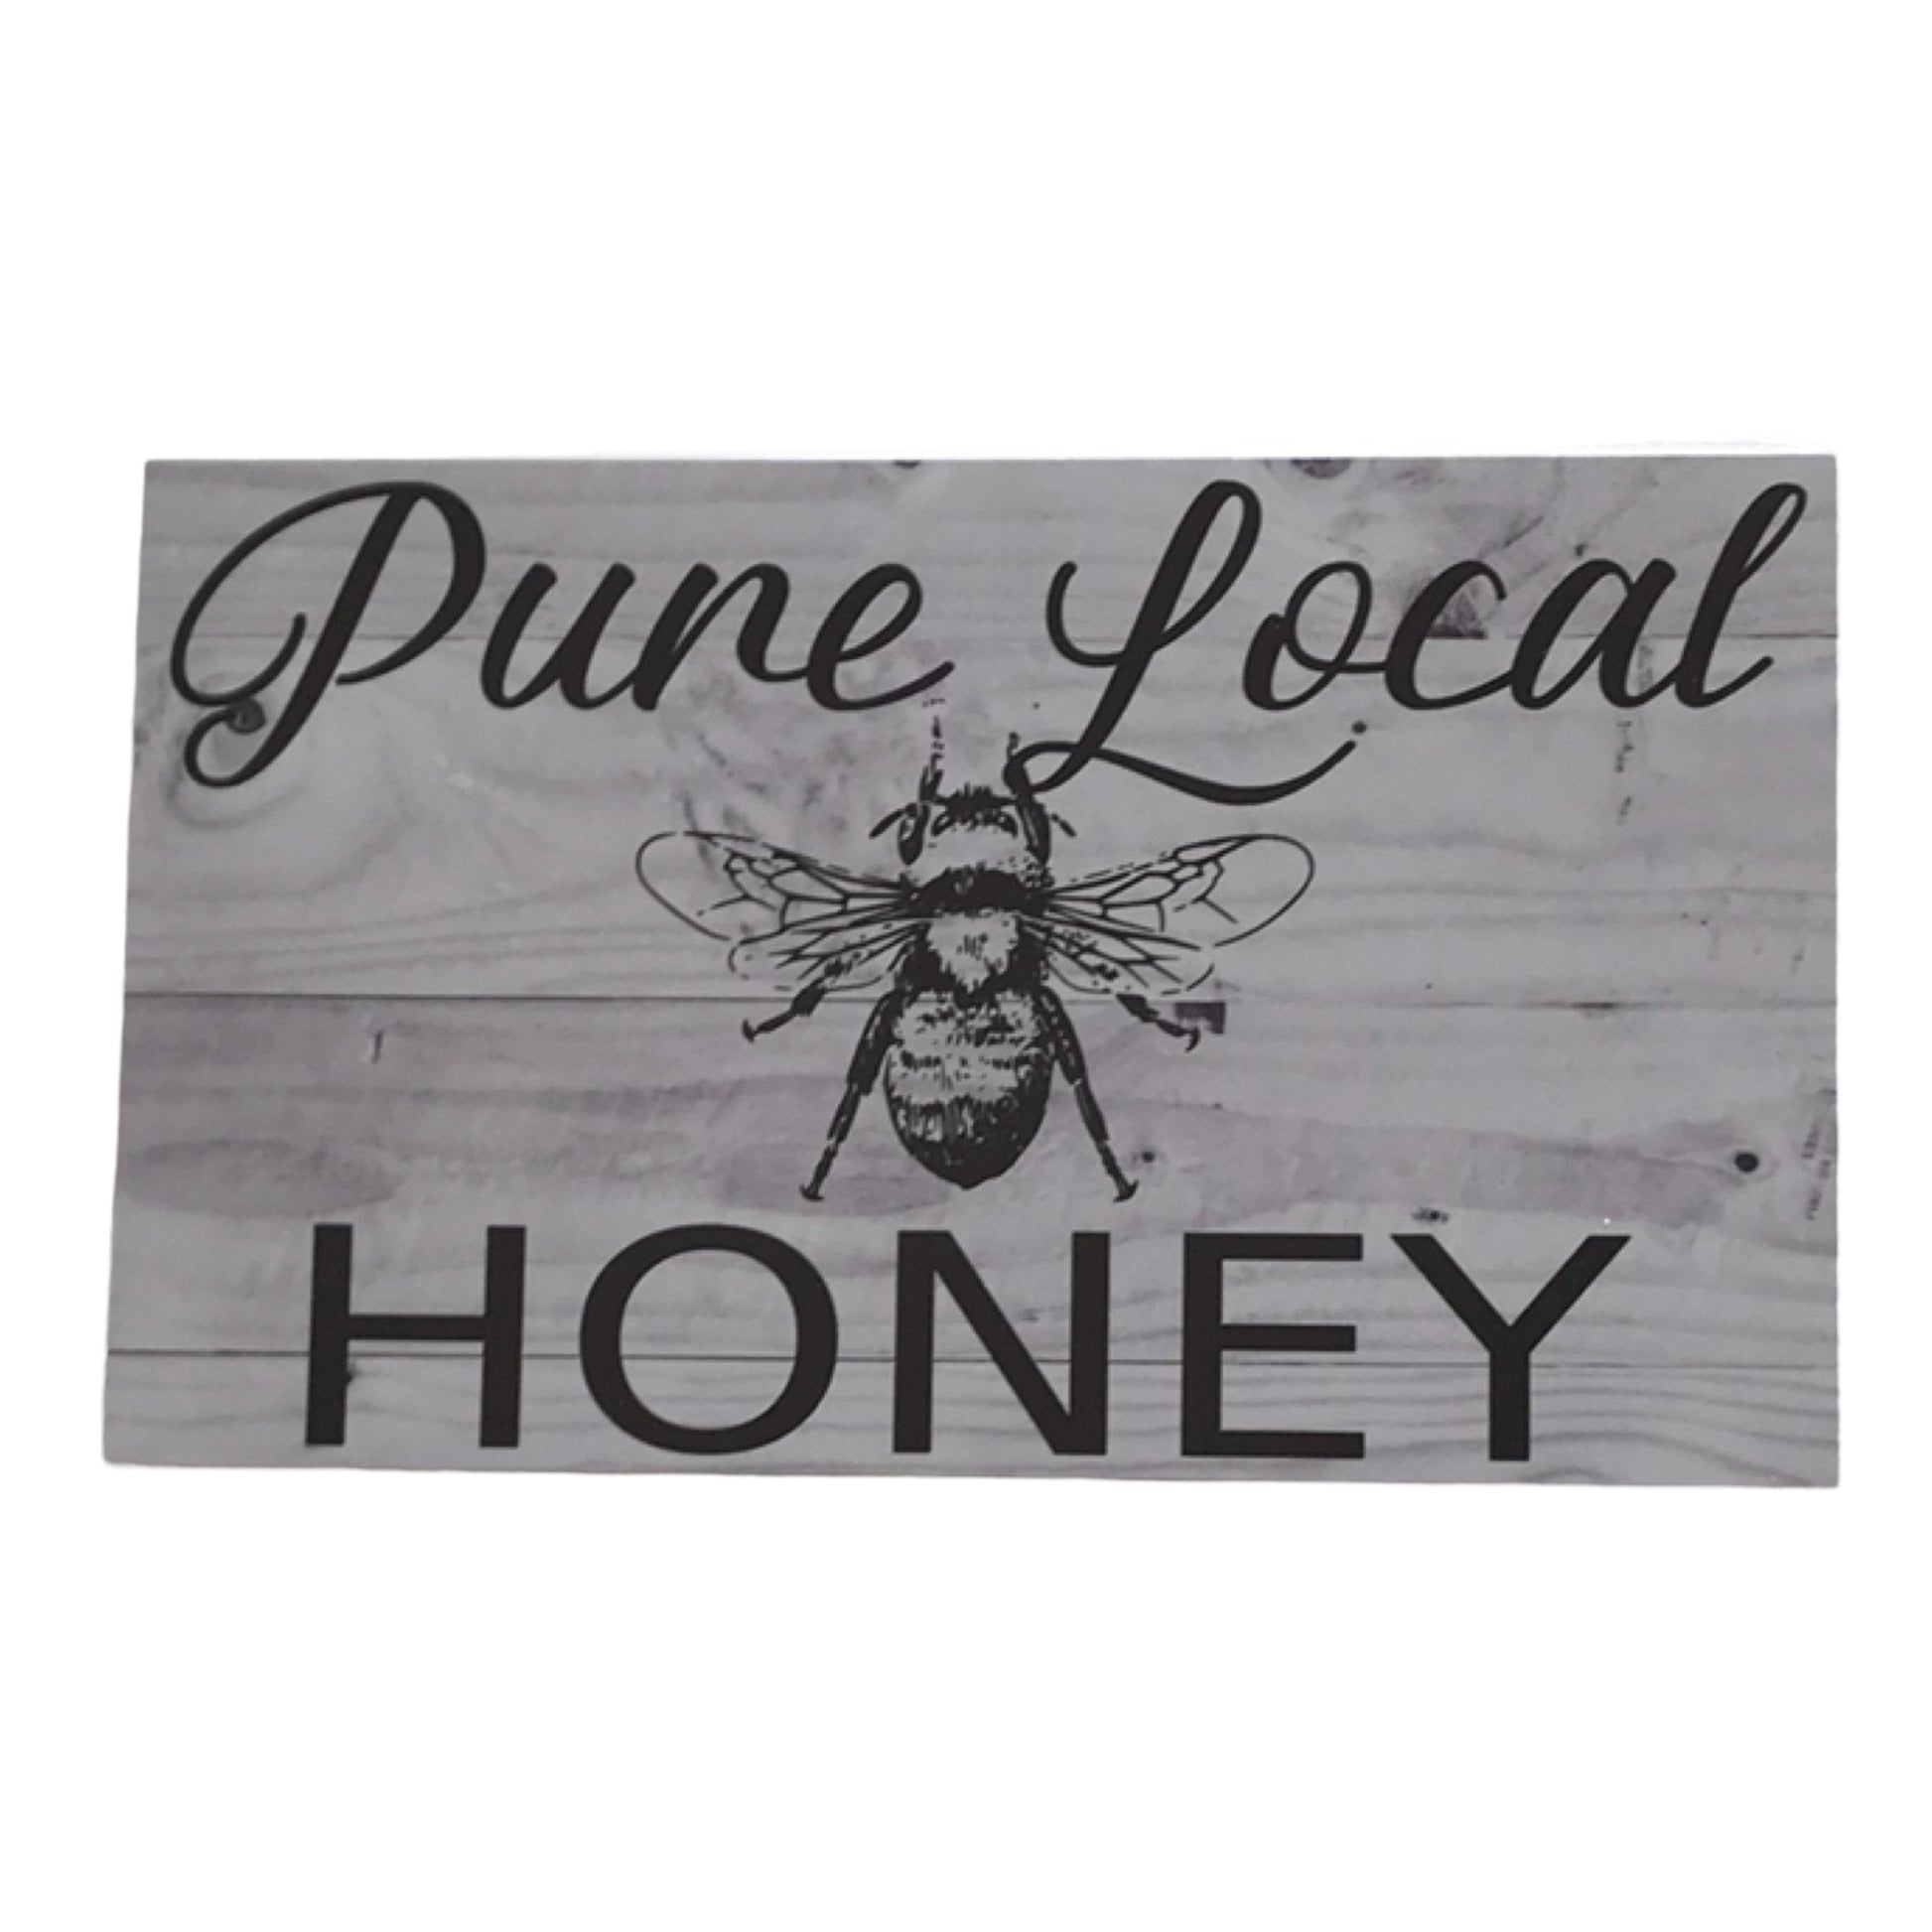 Pure Local Honey Apiary Apiarist Market Sign - The Renmy Store Homewares & Gifts 